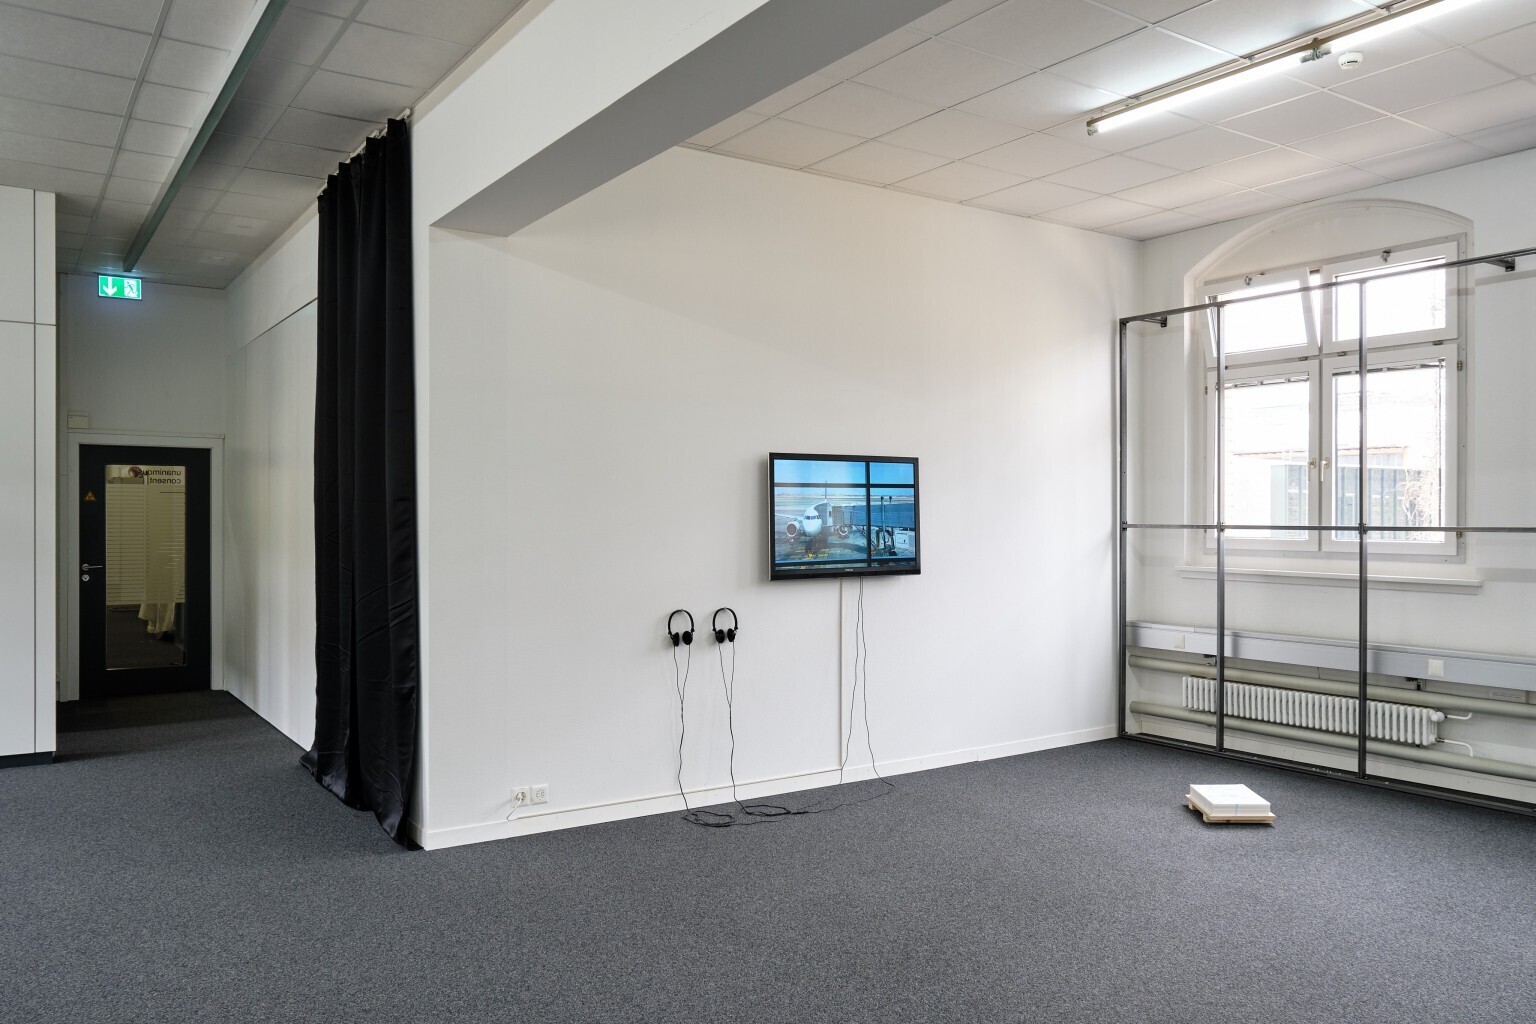 Installation view from Circular gestures